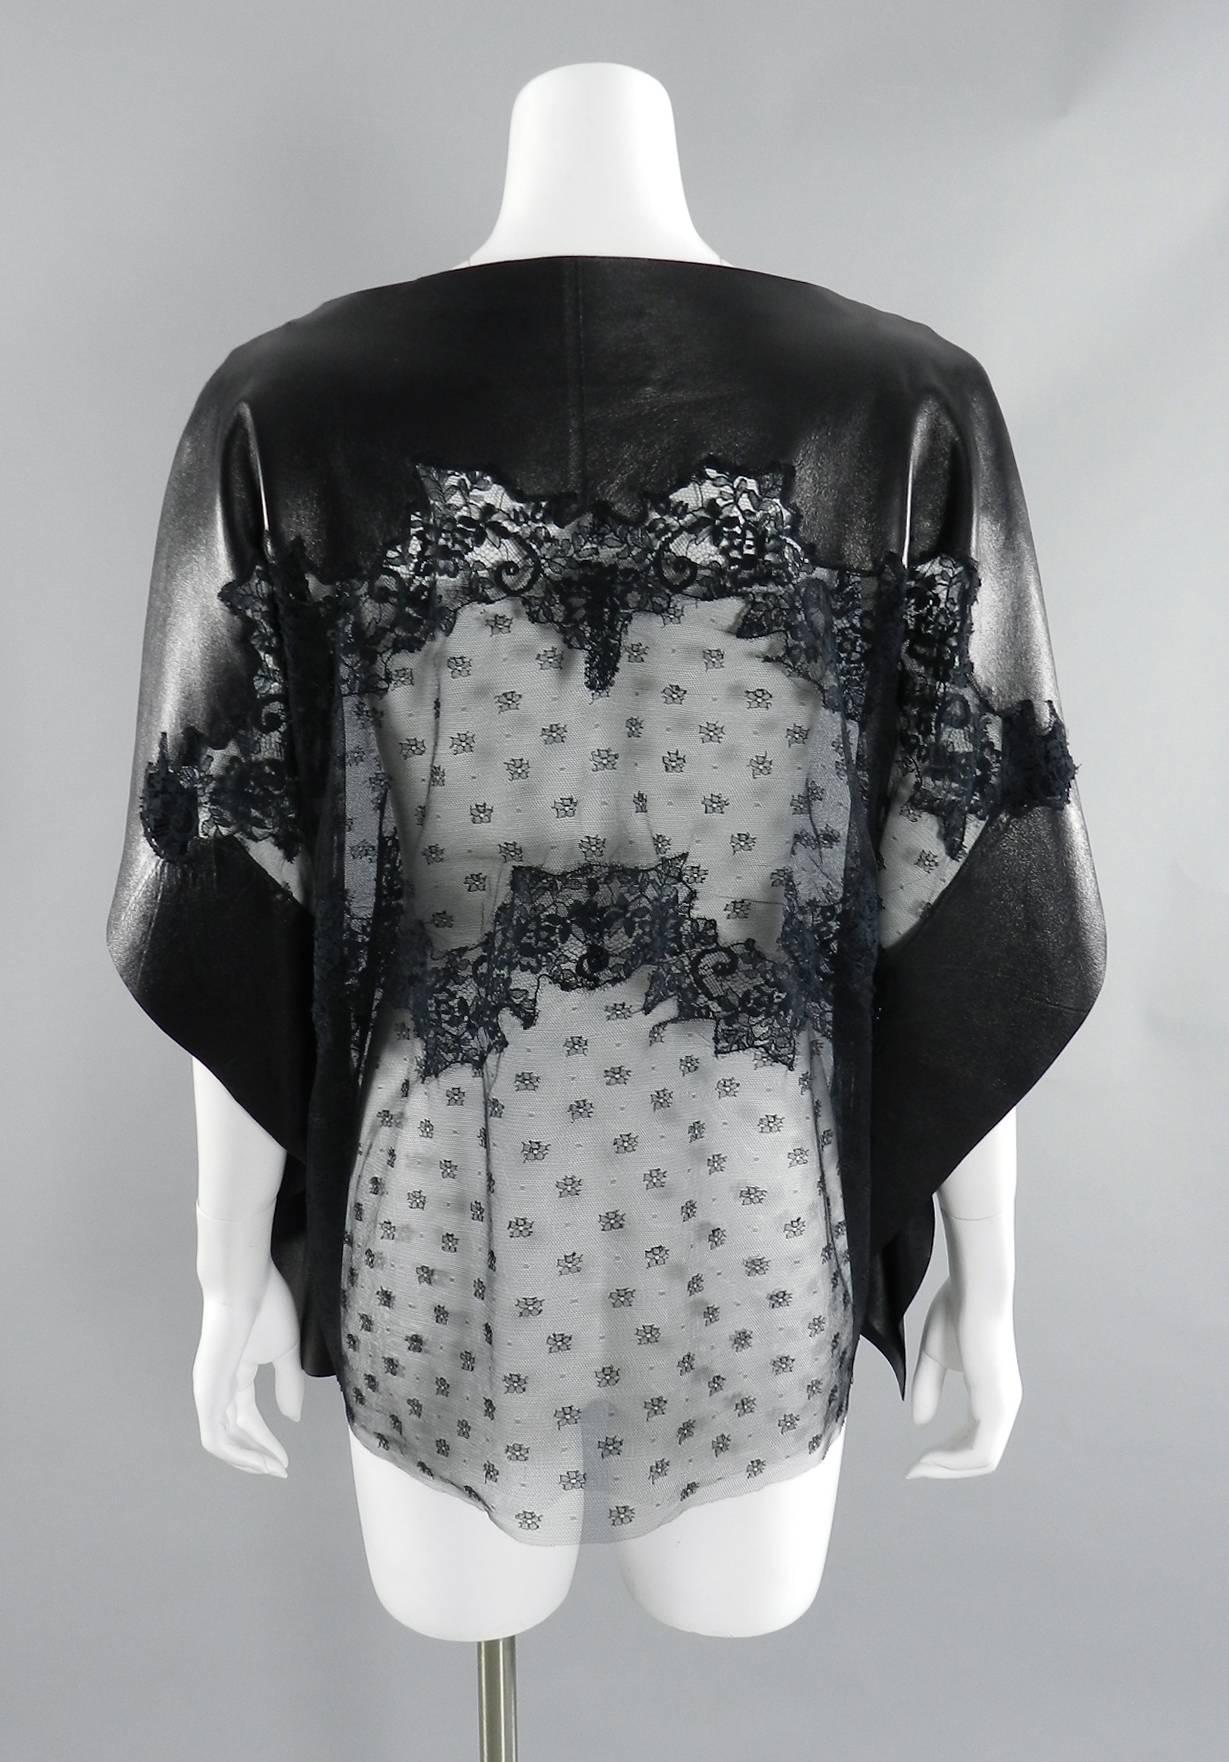 Women's Valentino Black Lambskin Leather and Sheer Lace Caftan Tunic Top